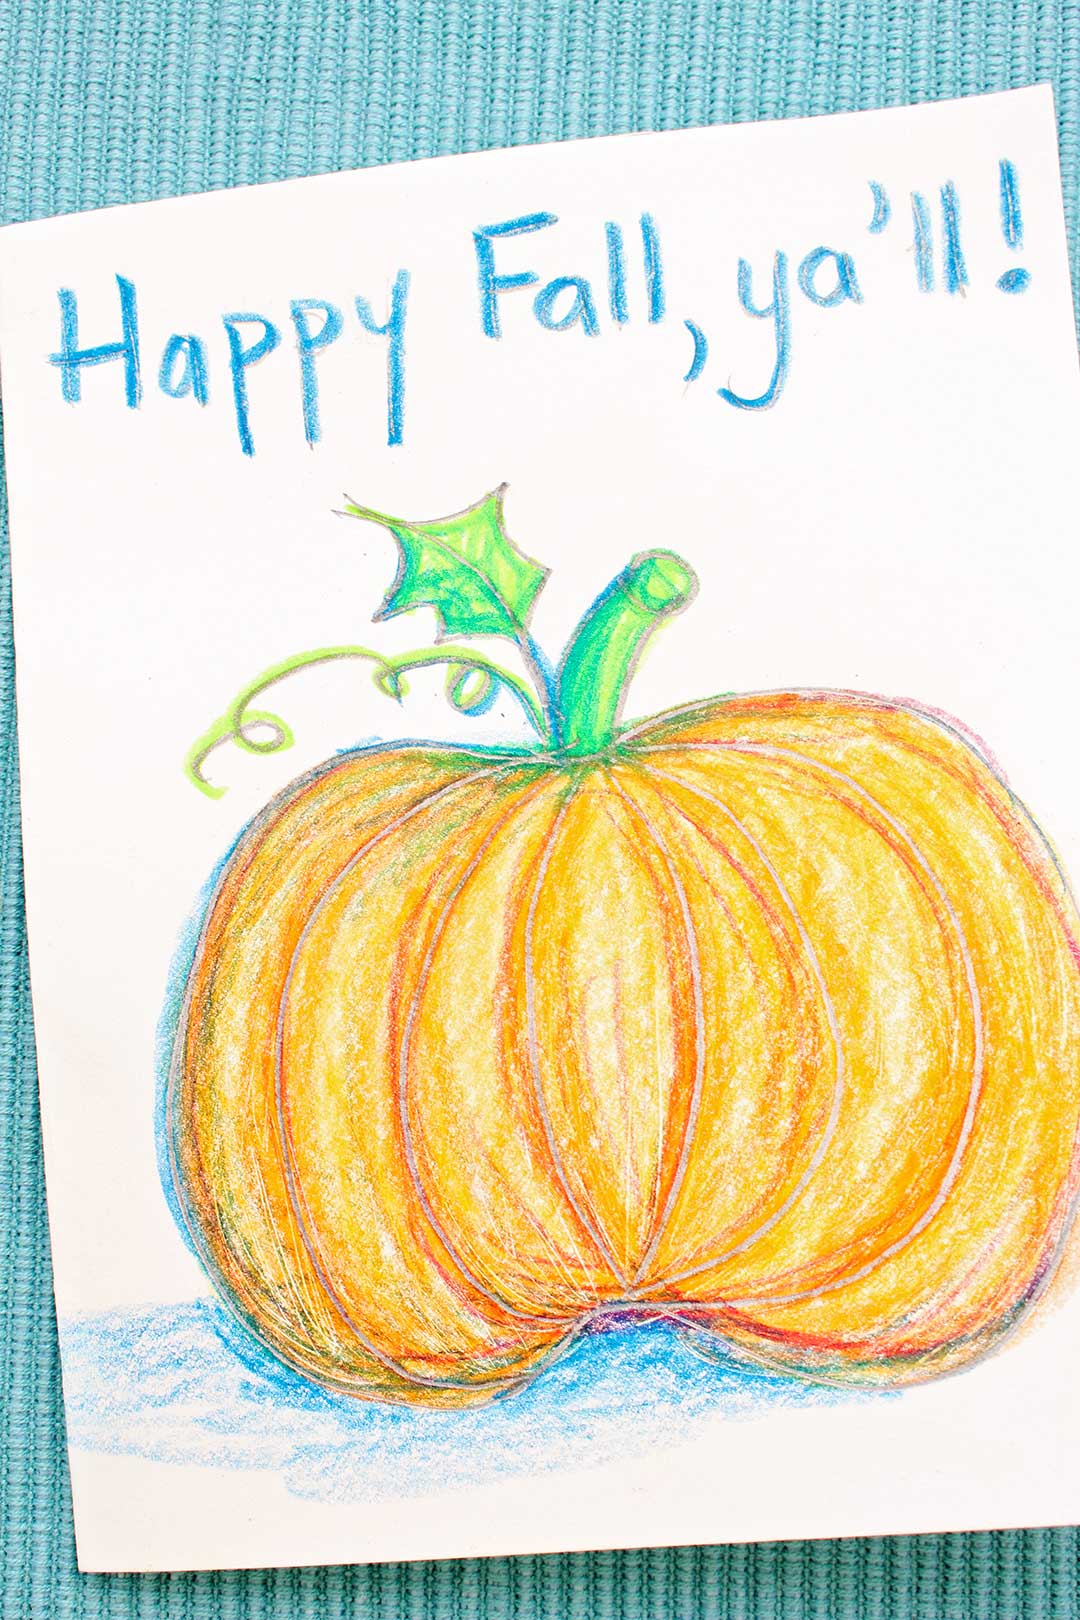 Colored pumpkin sketch greeting card resting on a blue woven placemat.